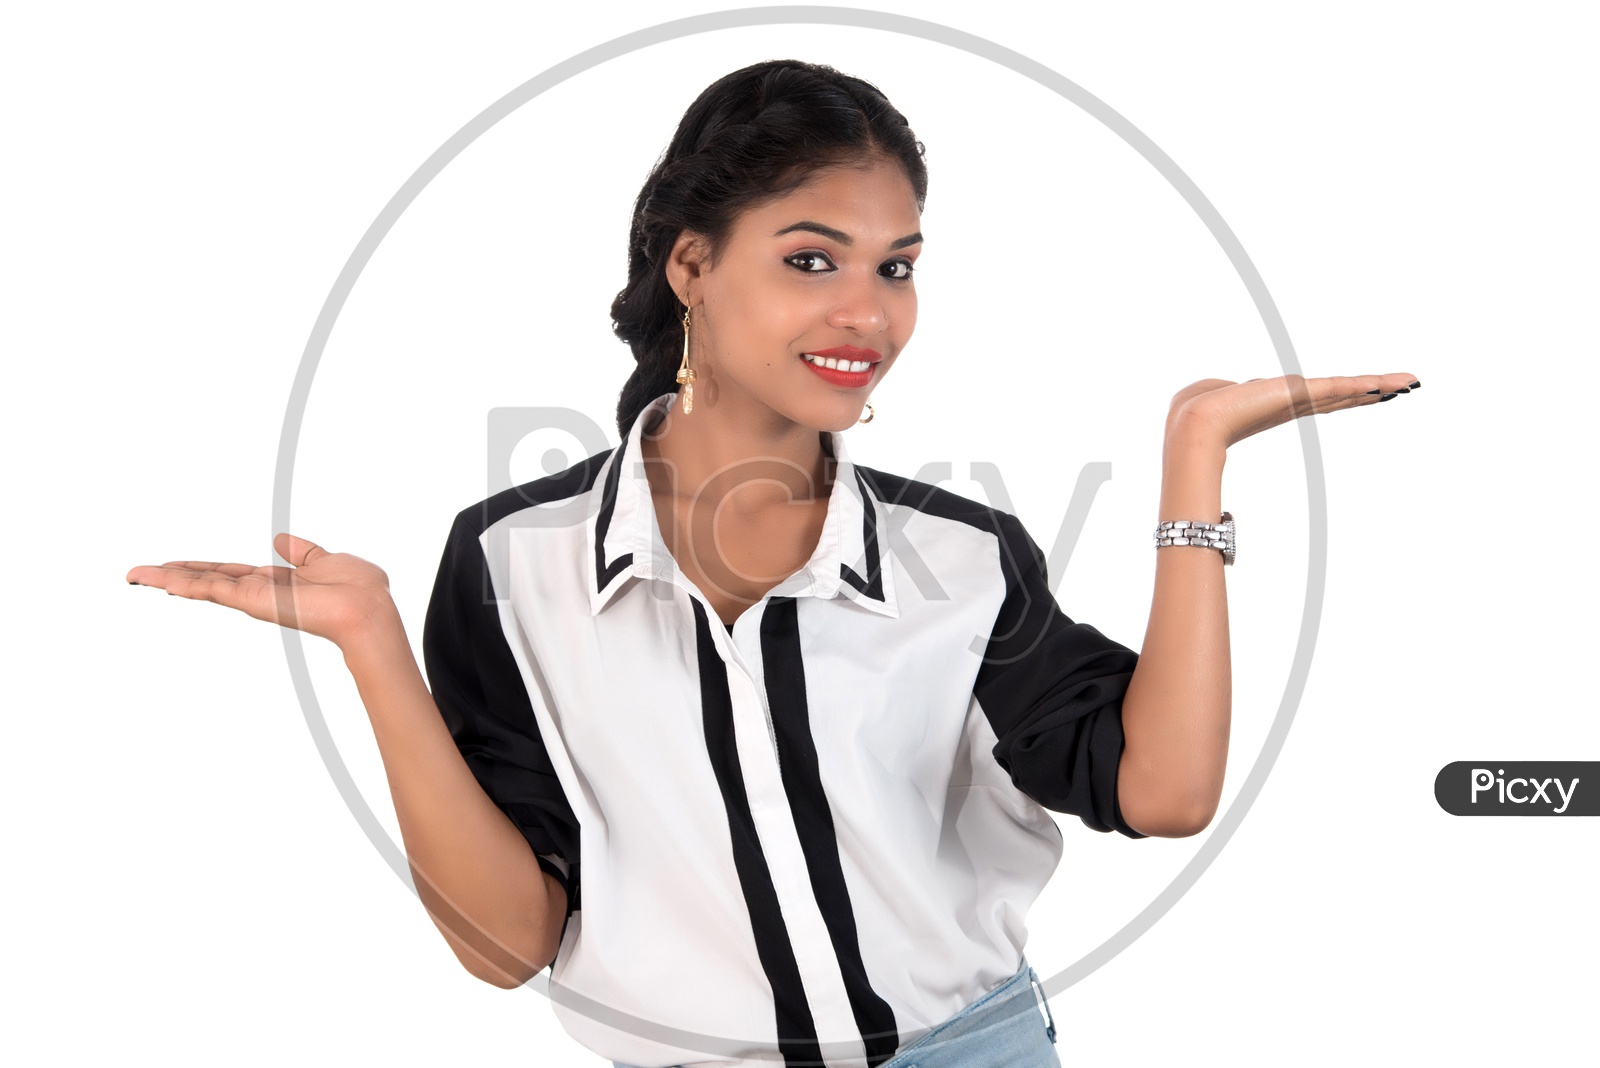 Young Beautiful Girl Holding Something In Hands With  a Smile Face Over an Isolated White Background